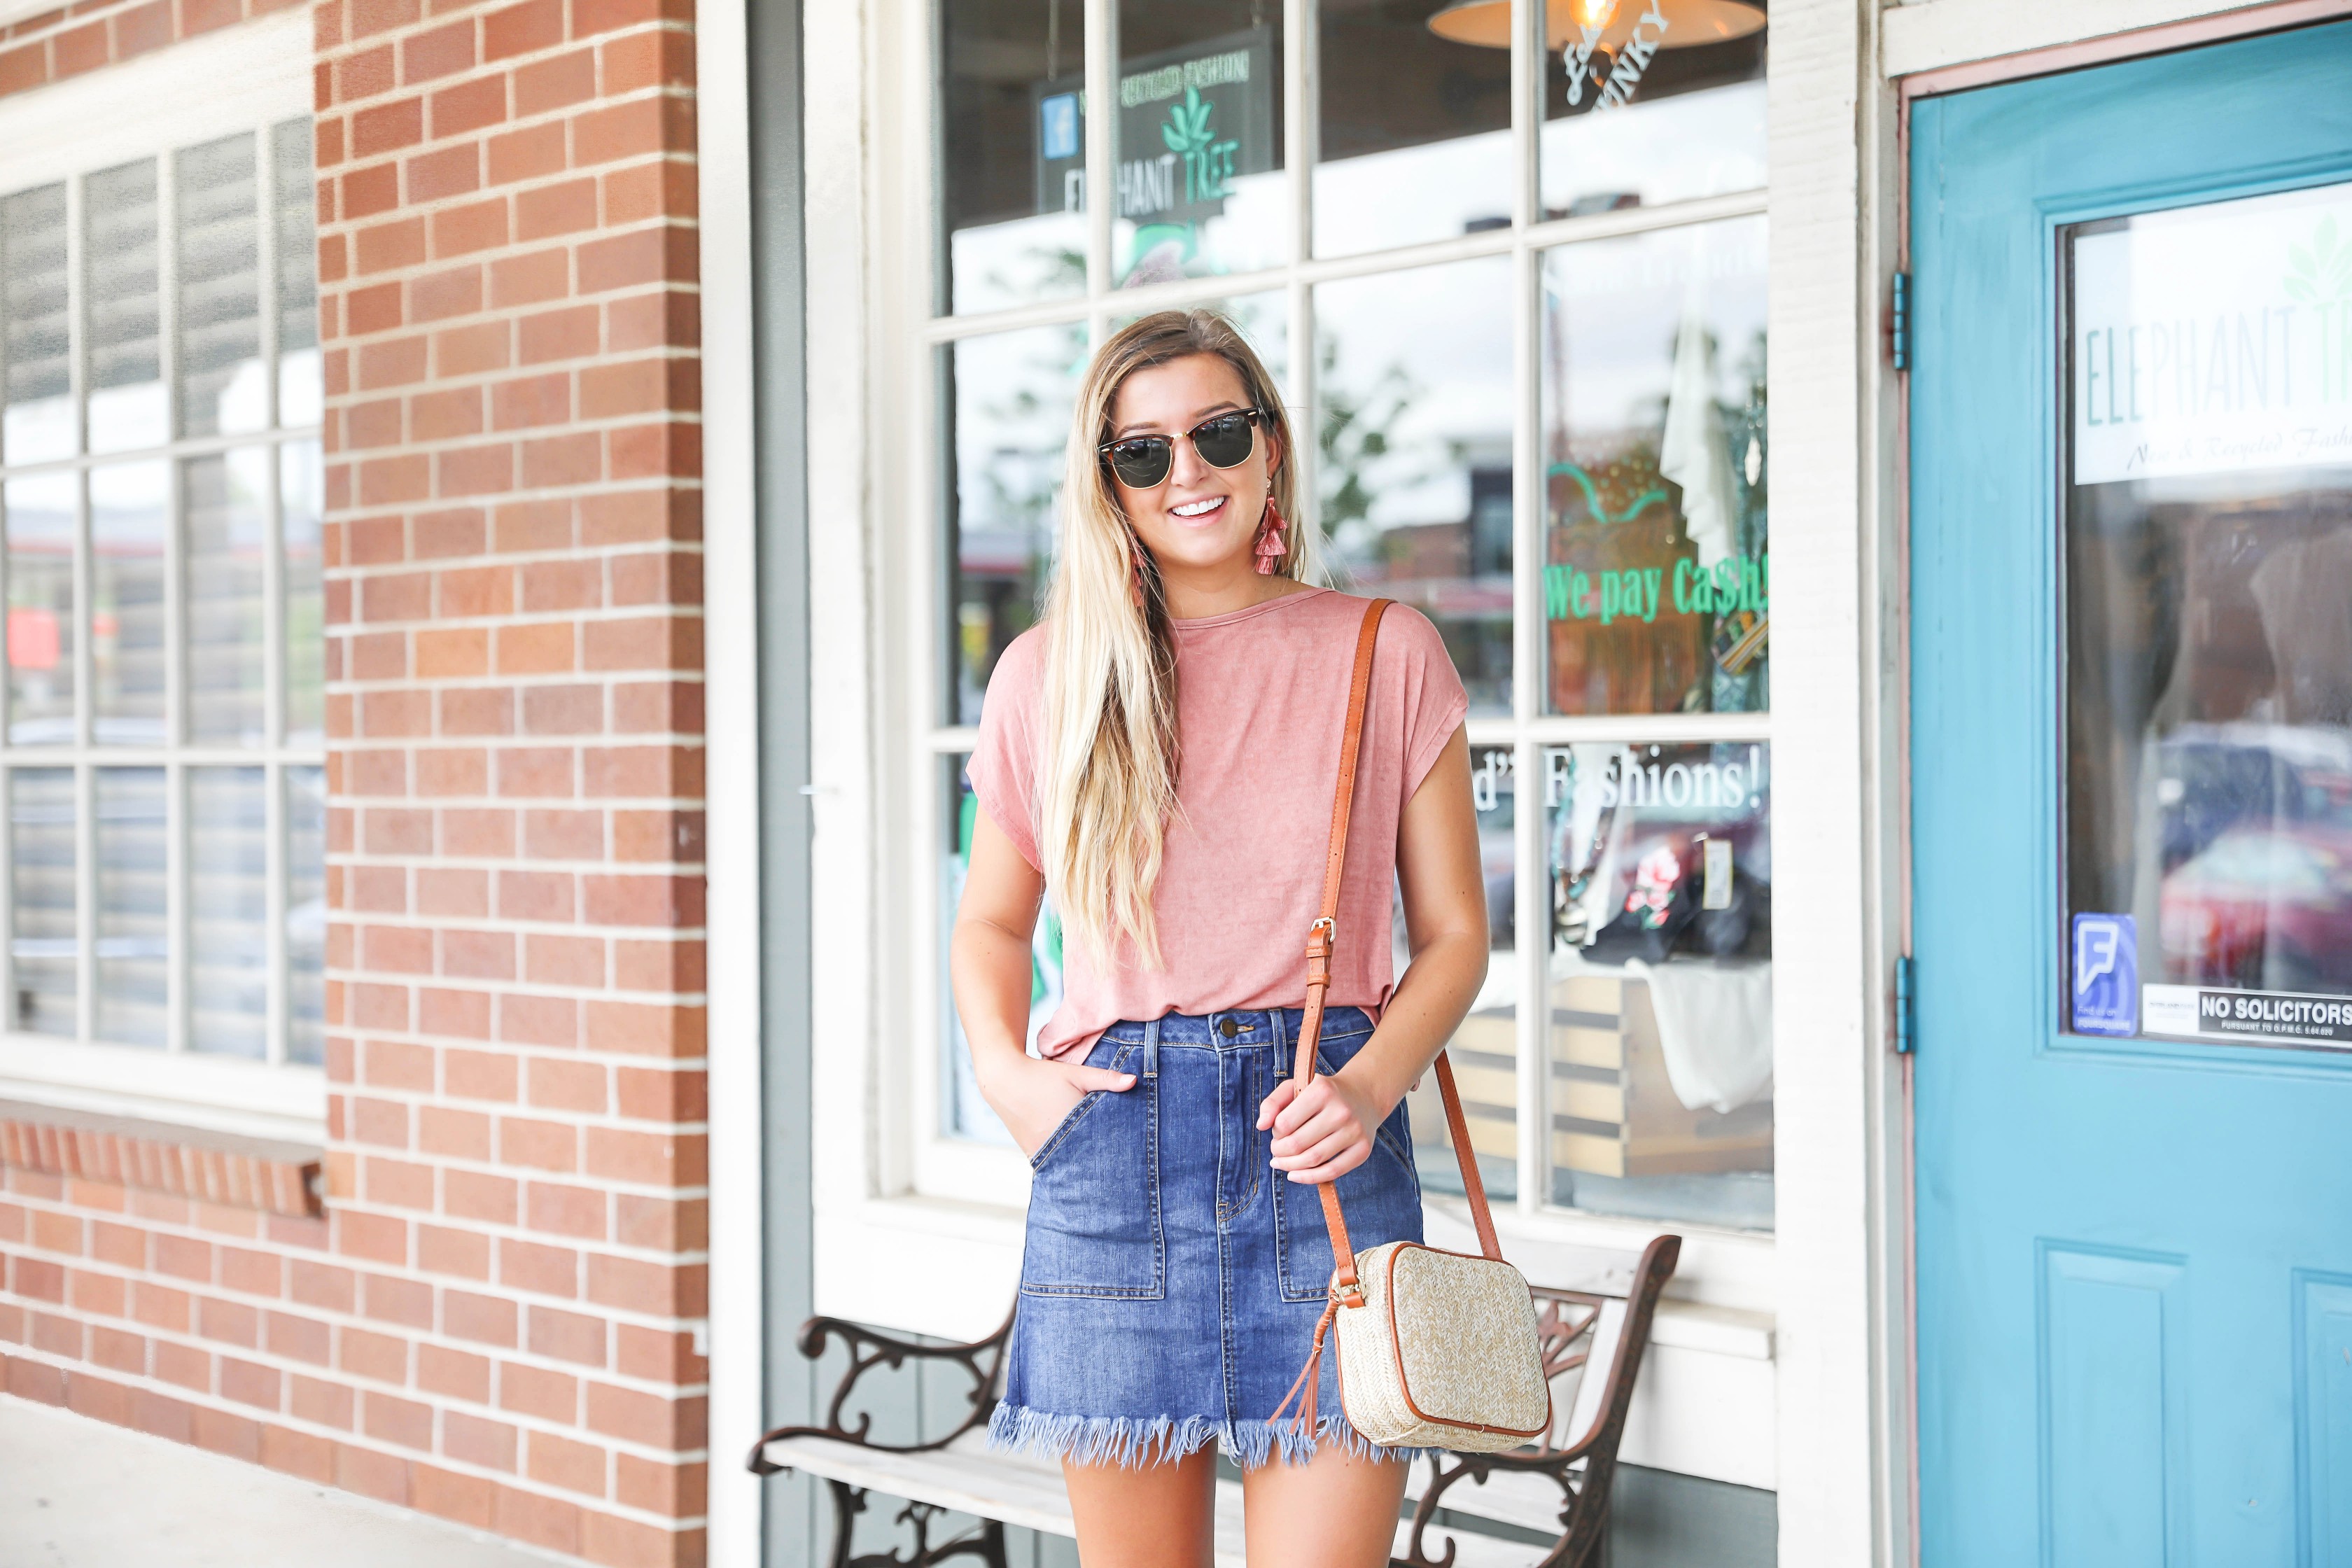 Open back tops are so cute in the summer! This cinched and tied coral top is so cute with this frayed jean skirt! I finished off the look with my straw bag and marc fisher wedges! Details on this summer outfit are on fashion blog daily dose of charm by lauren lindmark